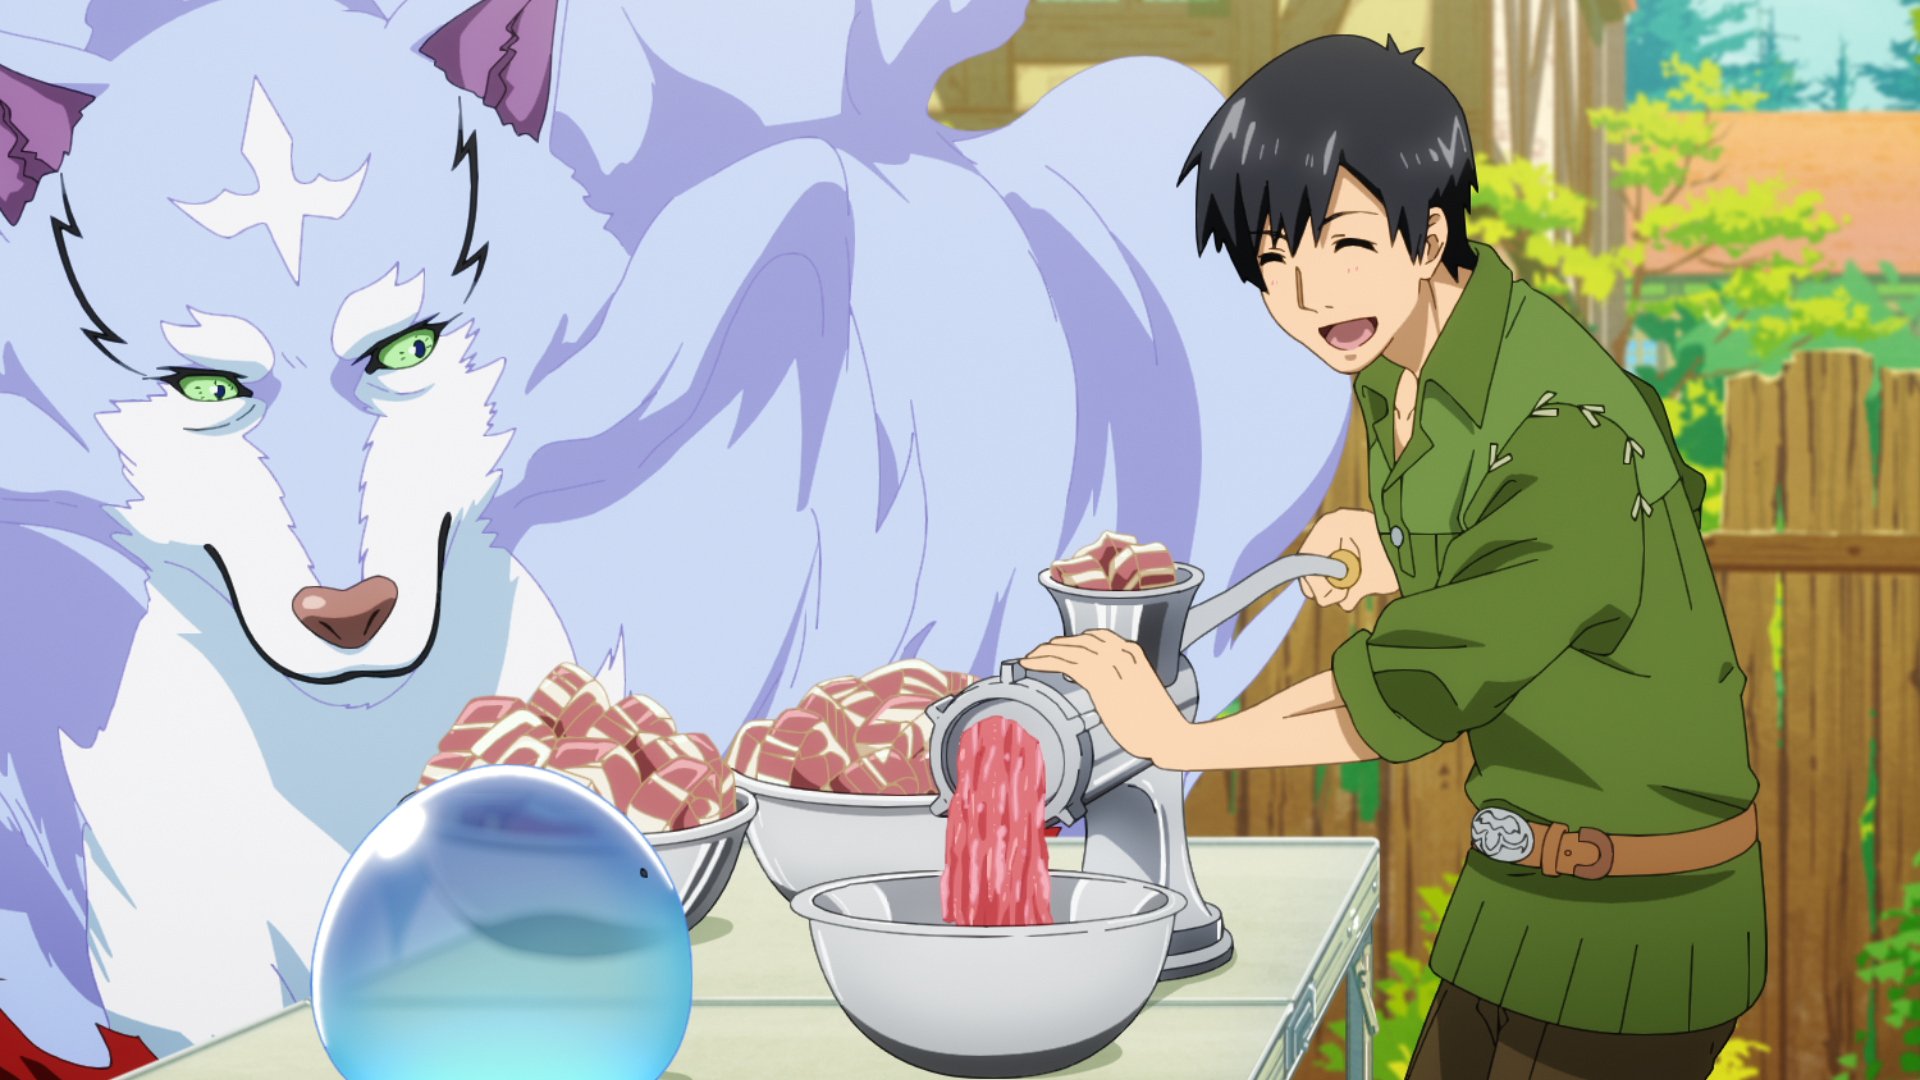 Campfire Cooking in Another World Announces Season 2 - Anime Corner